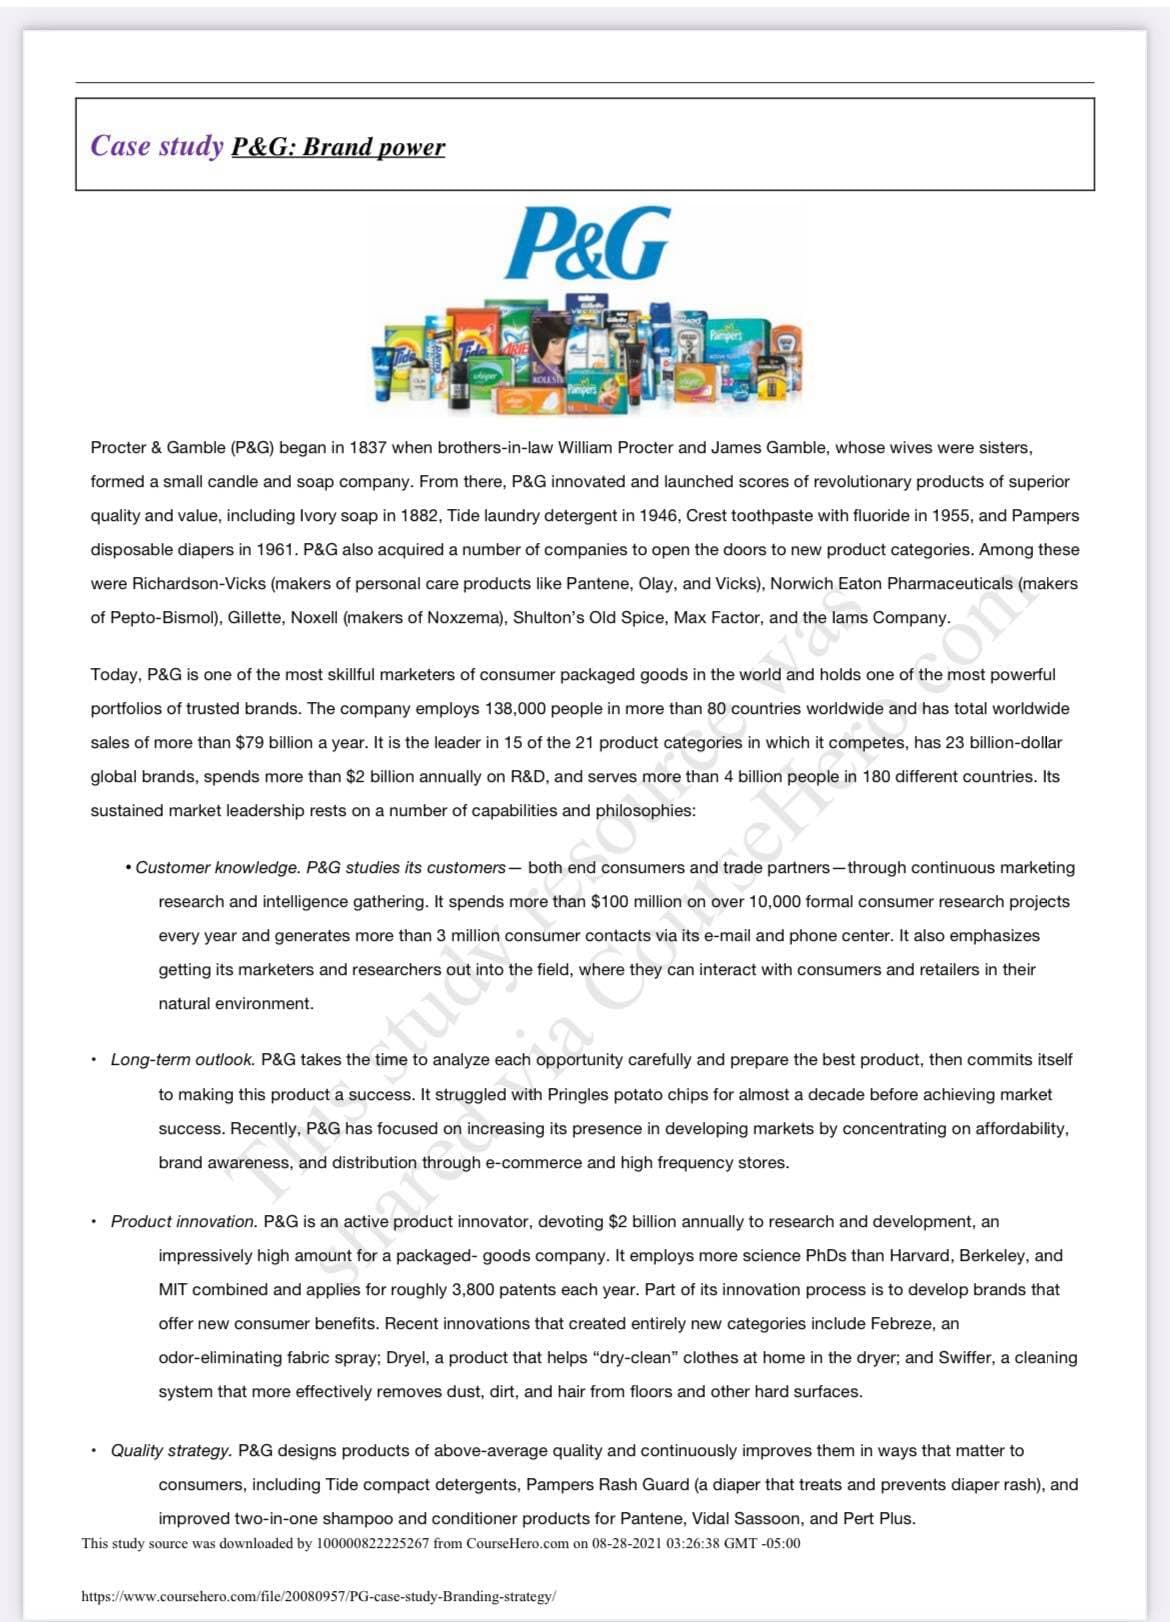 Case study P&G: Brand power
P&G
ADLES
Procter & Gamble (P&G) began in 1837 when brothers-in-law William Procter and James Gamble, whose wives were sisters,
formed a small candle and soap company. From there, P&G innovated and launched scores of revolutionary products of superior
quality and value, including Ivory soap in 1882, Tide laundry detergent in 1946, Crest toothpaste with fluoride in 1955, and Pampers
disposable diapers in 1961. P&G also acquired a number of companies to open the doors to new product categories. Among these
were Richardson-Vicks (makers of personal care products like Pantene, Olay, and Vicks), Norwich Eaton Pharmaceuticals (makers
of Pepto-Bismol), Gillette, Noxell (makers of Noxzema), Shulton's Old Spice, Max Factor, and the lams Company.
Today, P&G is one of the most skillful marketers of consumer packaged goods in the world and holds one of the most powerful
portfolios of trusted brands. The company employs 138,000 people in more than 80 countries worldwide and has total worldwide
sales of more than $79 billion a year. It is the leader in 15 of the 21 product categories in which it competes, has 23 billion-dollar
global brands, spends more than $2 billion annually on R&D, and serves more than 4 billion people in 180 different countries. Its
sustained market leadership rests on a number of capabilities and philosophies:
ehoterstone
• Customer knowledge. P&G studies its customers- both end consumers and trade partners-through continuous marketing
research and intelligence gathering. It spends more than $100 million on over 10,000 formal consumer research projects
every year and generates more than 3 million consumer contacts via its e-mail and phone center. It also emphasizes
getting its marketers and researchers out into the field, where they can interact with consumers and retailers in their
natural environment.
Long-term outlook. P&G takes the time to analyze each opportunity carefully and prepare the best product, then commits itself
istuters
to making this product a success. It struggled with Pringles potato chips for almost a decade before achieving market
success. Recently, P&G has focused on increasing its presence in developing markets by concentrating on affordability,
brand awareness, and distribution through e-commerce and high frequency stores.
Product innovation. P&G is an active product innovator, devoting $2 billion annually to research and development, an
impressively high amount for a packaged- goods company. It employs more science PhDs than Harvard, Berkeley, and
MIT combined and applies for roughly 3,800 patents each year. Part of its innovation process is to develop brands that
offer new consumer benefits. Recent innovations that created entirely new categories include Febreze, an
odor-eliminating fabric spray; Dryel, a product that helps "dry-clean" clothes at home in the dryer; and Swiffer, a cleaning
system that more effectively removes dust, dirt, and hair from floors and other hard surfaces.
• Quality strategy. P&G designs products of above-average quality and continuously improves them in ways that matter to
consumers, including Tide compact detergents, Pampers Rash Guard (a diaper that treats and prevents diaper rash), and
improved two-in-one shampoo and conditioner products for Pantene, Vidal Sassoon, and Pert Plus.
This study source was downloaded by 100000822225267 from CourseHero.com on 08-28-2021 03:26:38 GMT -05:00
https://www.coursehero.com/file/20080957/PG-case-study-Branding-strategy/
